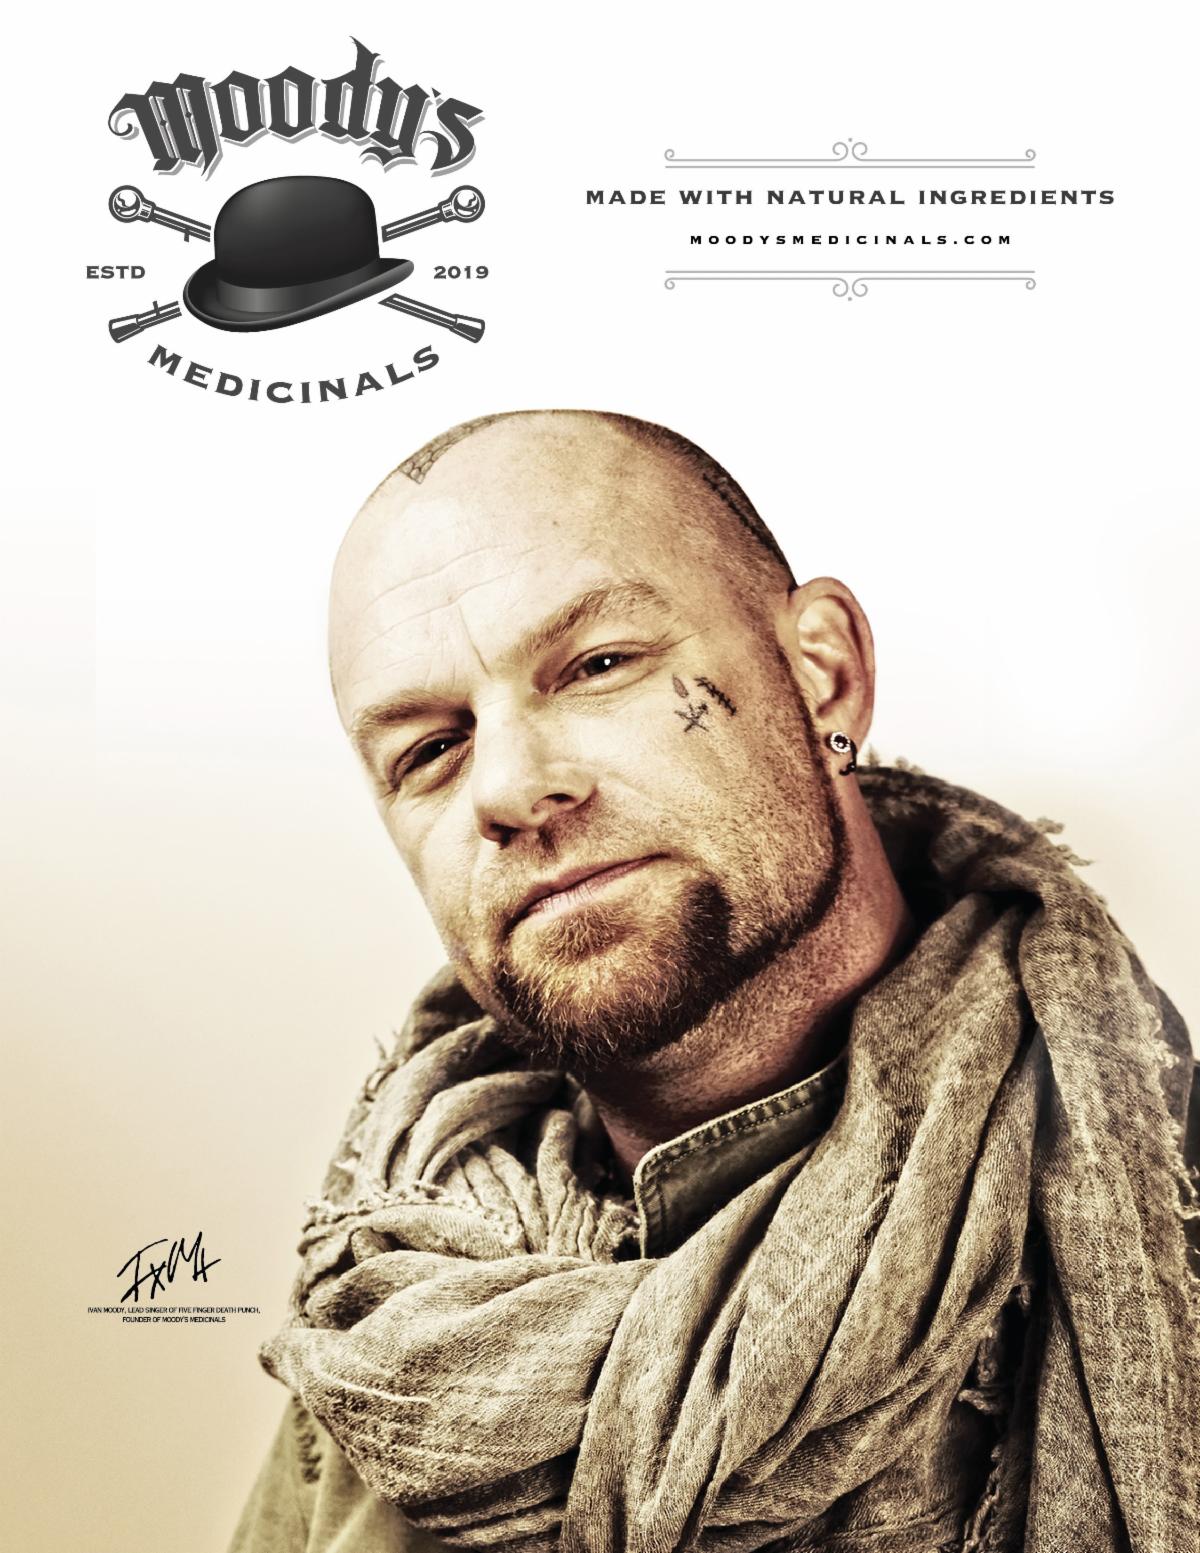 Ivan L. Moody-Lead Singer Of Five Finger Death Punch-Annouces Donations Of Hand Sanitizers To Charitable Organizations For Veterans And All Previous Customers